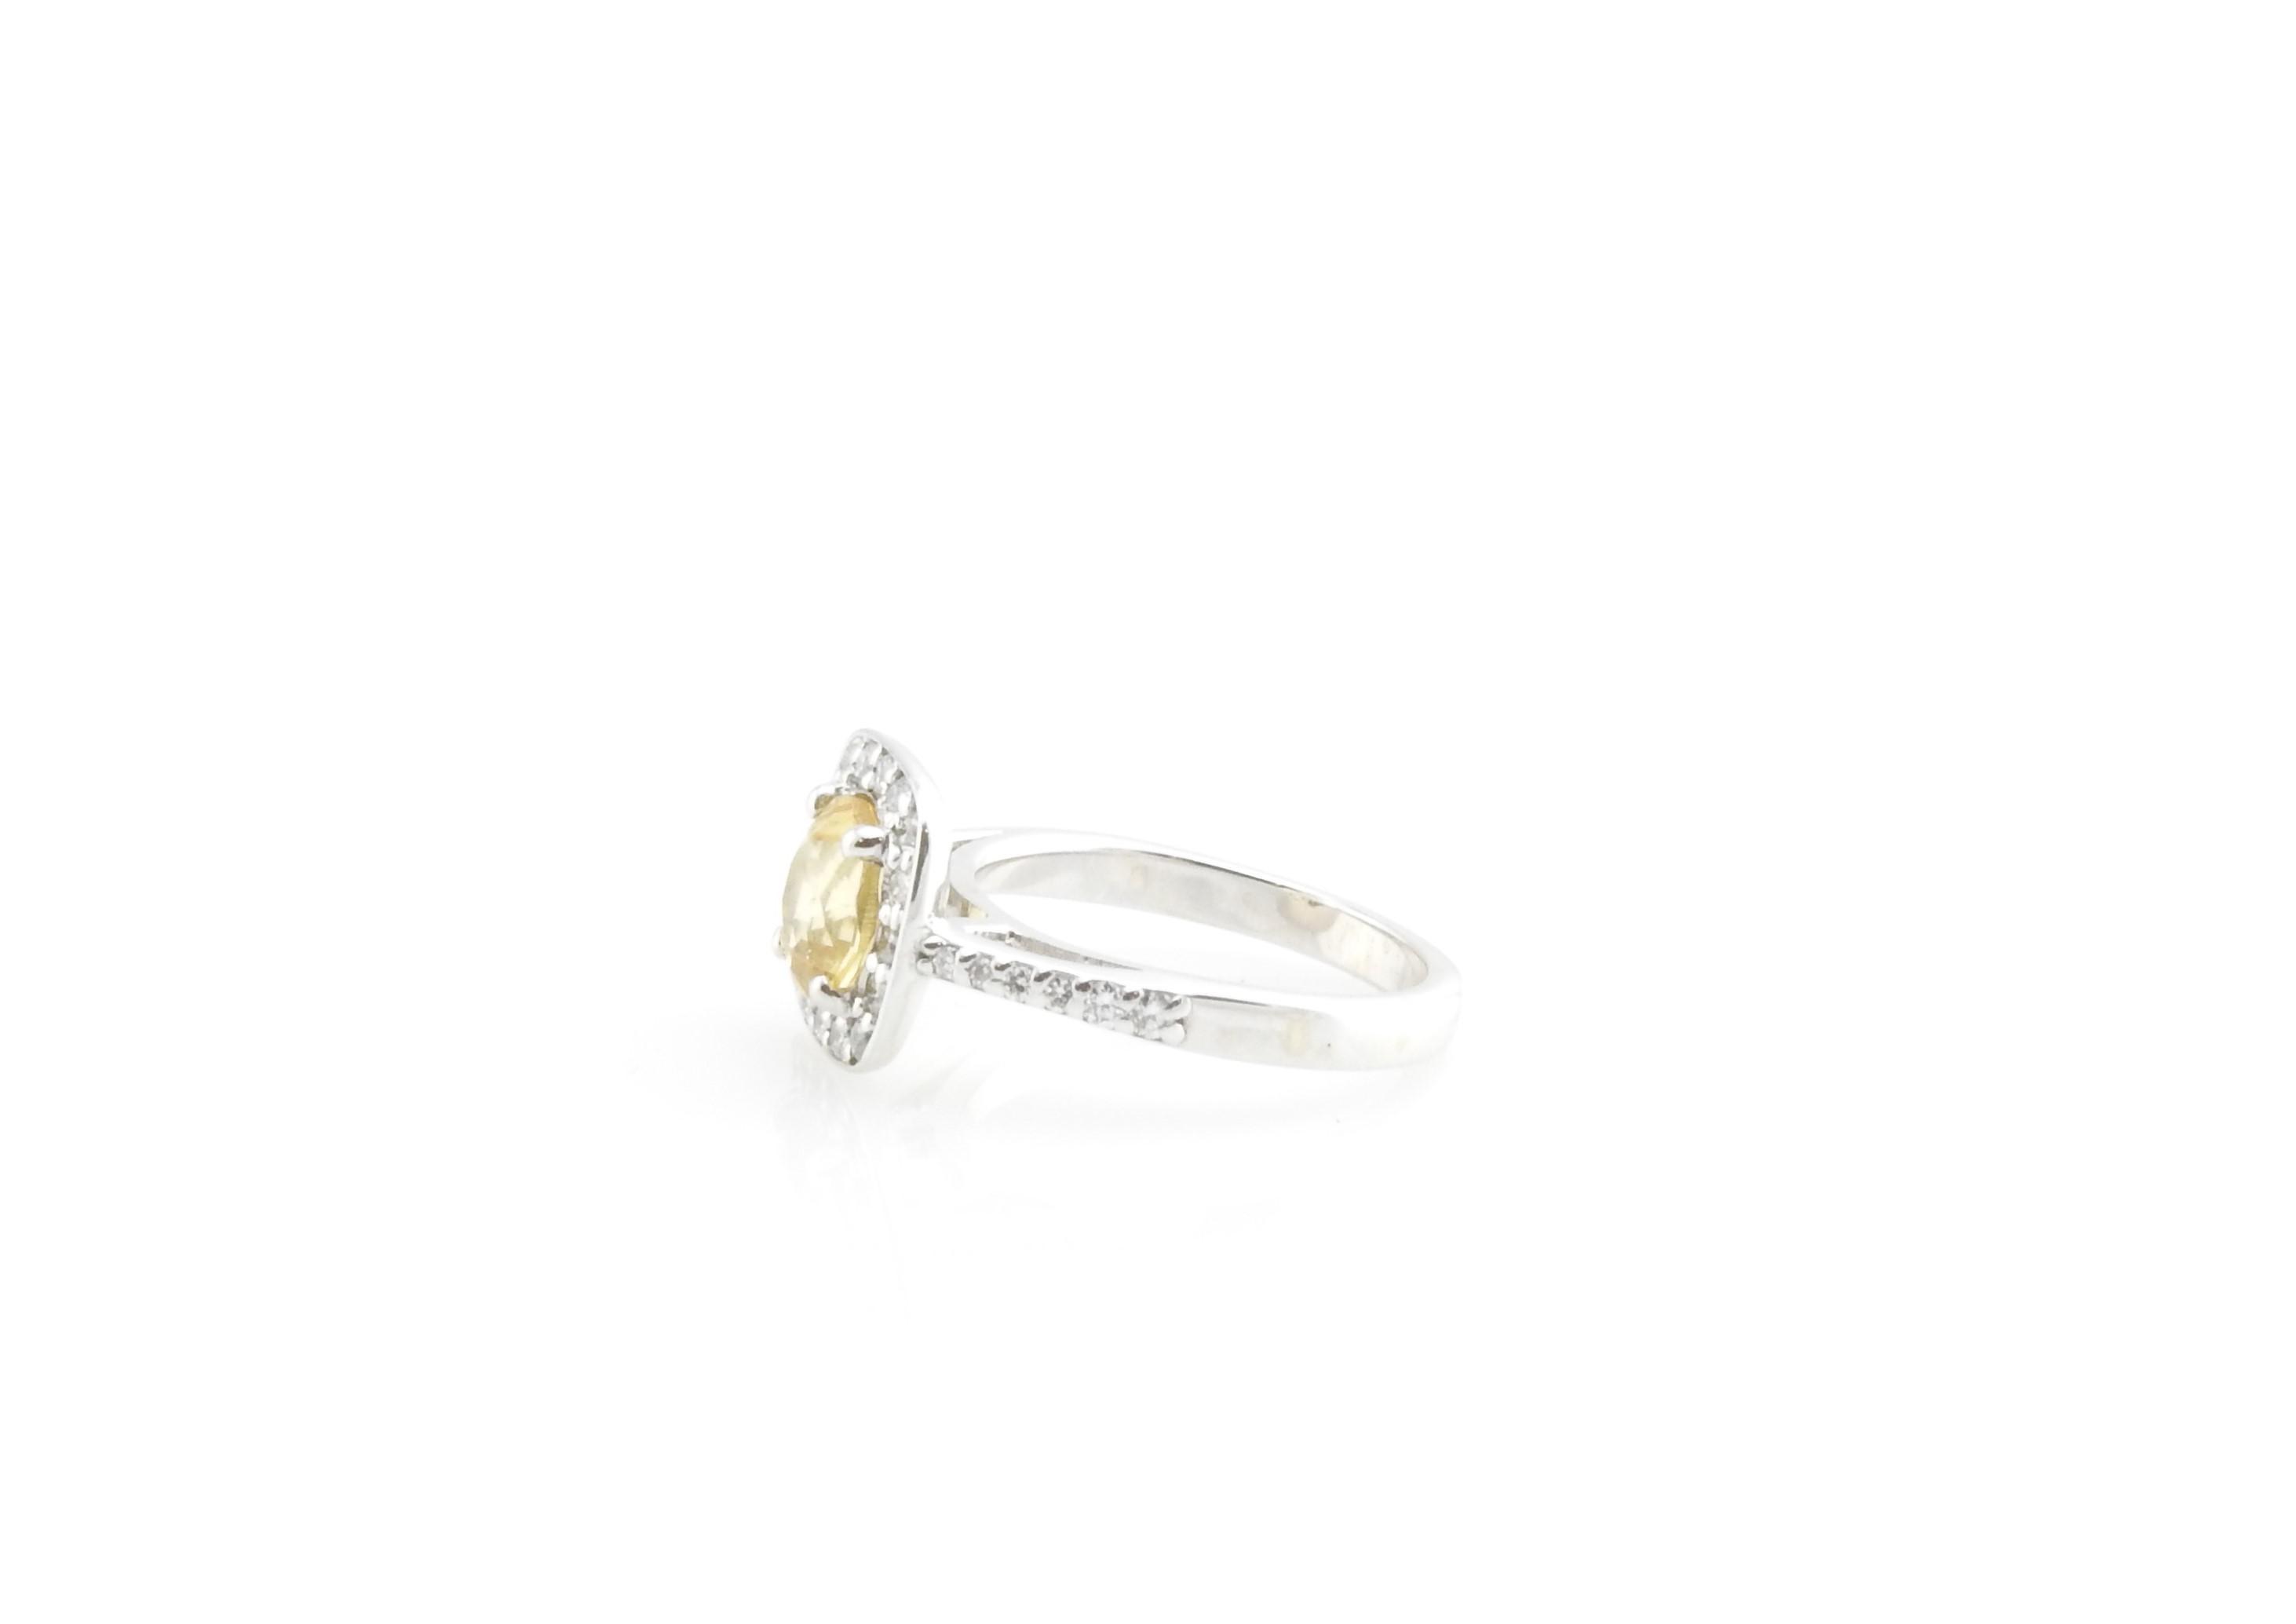 Vintage 14 Karat White Gold Yellow Citrine and Diamond Ring Size 5-

This stunning ring features one round yellow citrine stone (1.25 ct.) and 28 round brilliant cut diamond set in elegant 14K white gold.

Comes with a Gemological Appraisal Industry